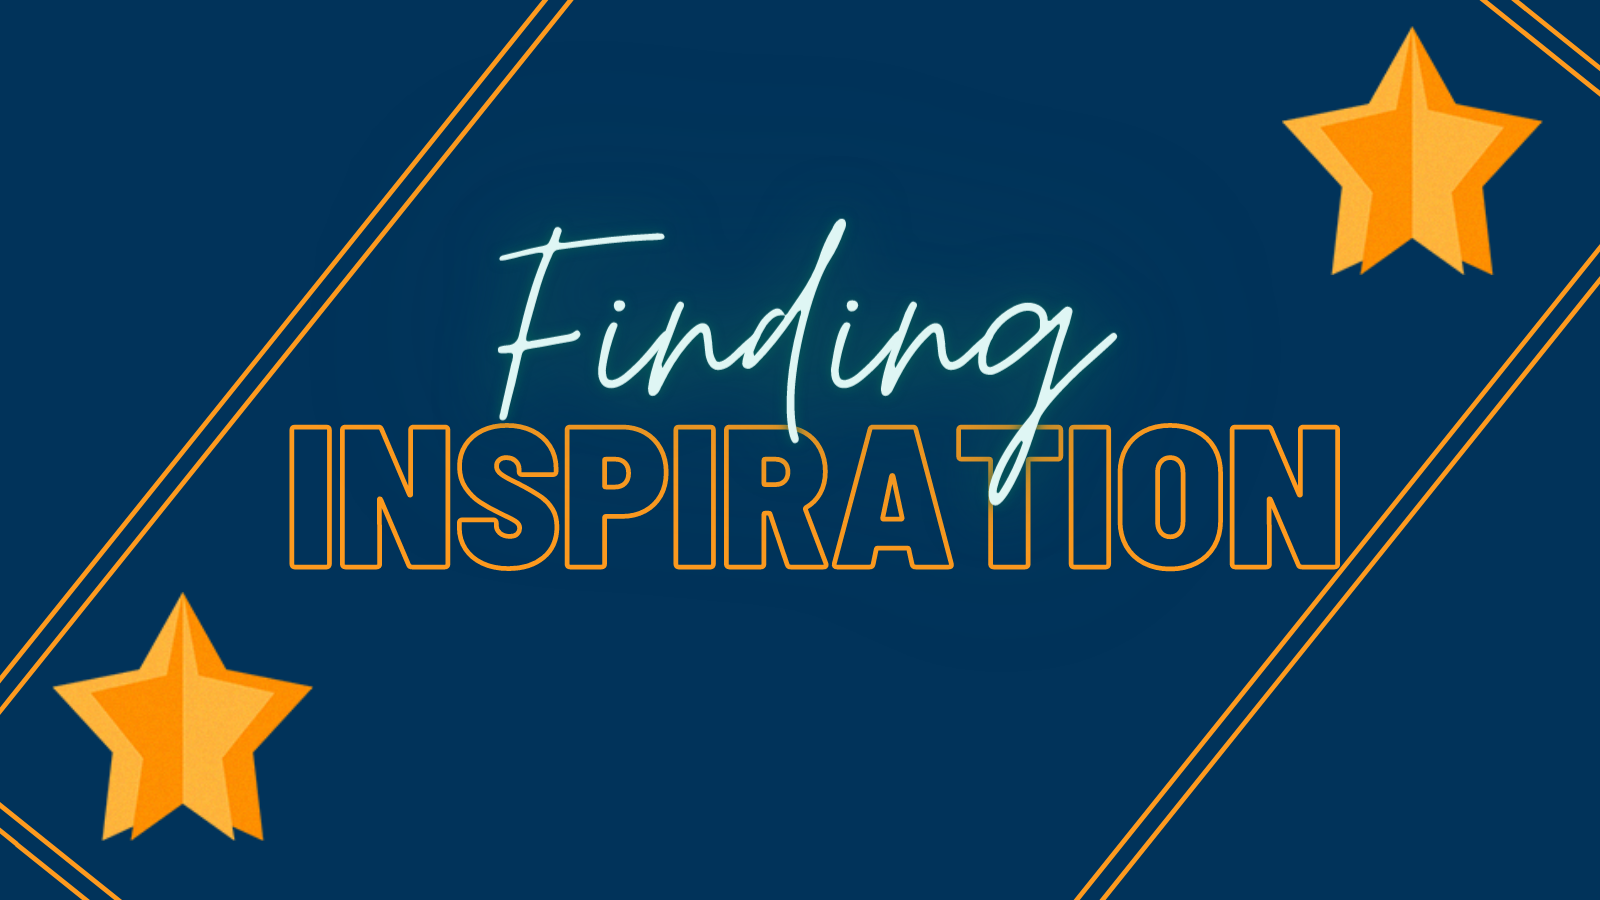 "Finding Inspiration"